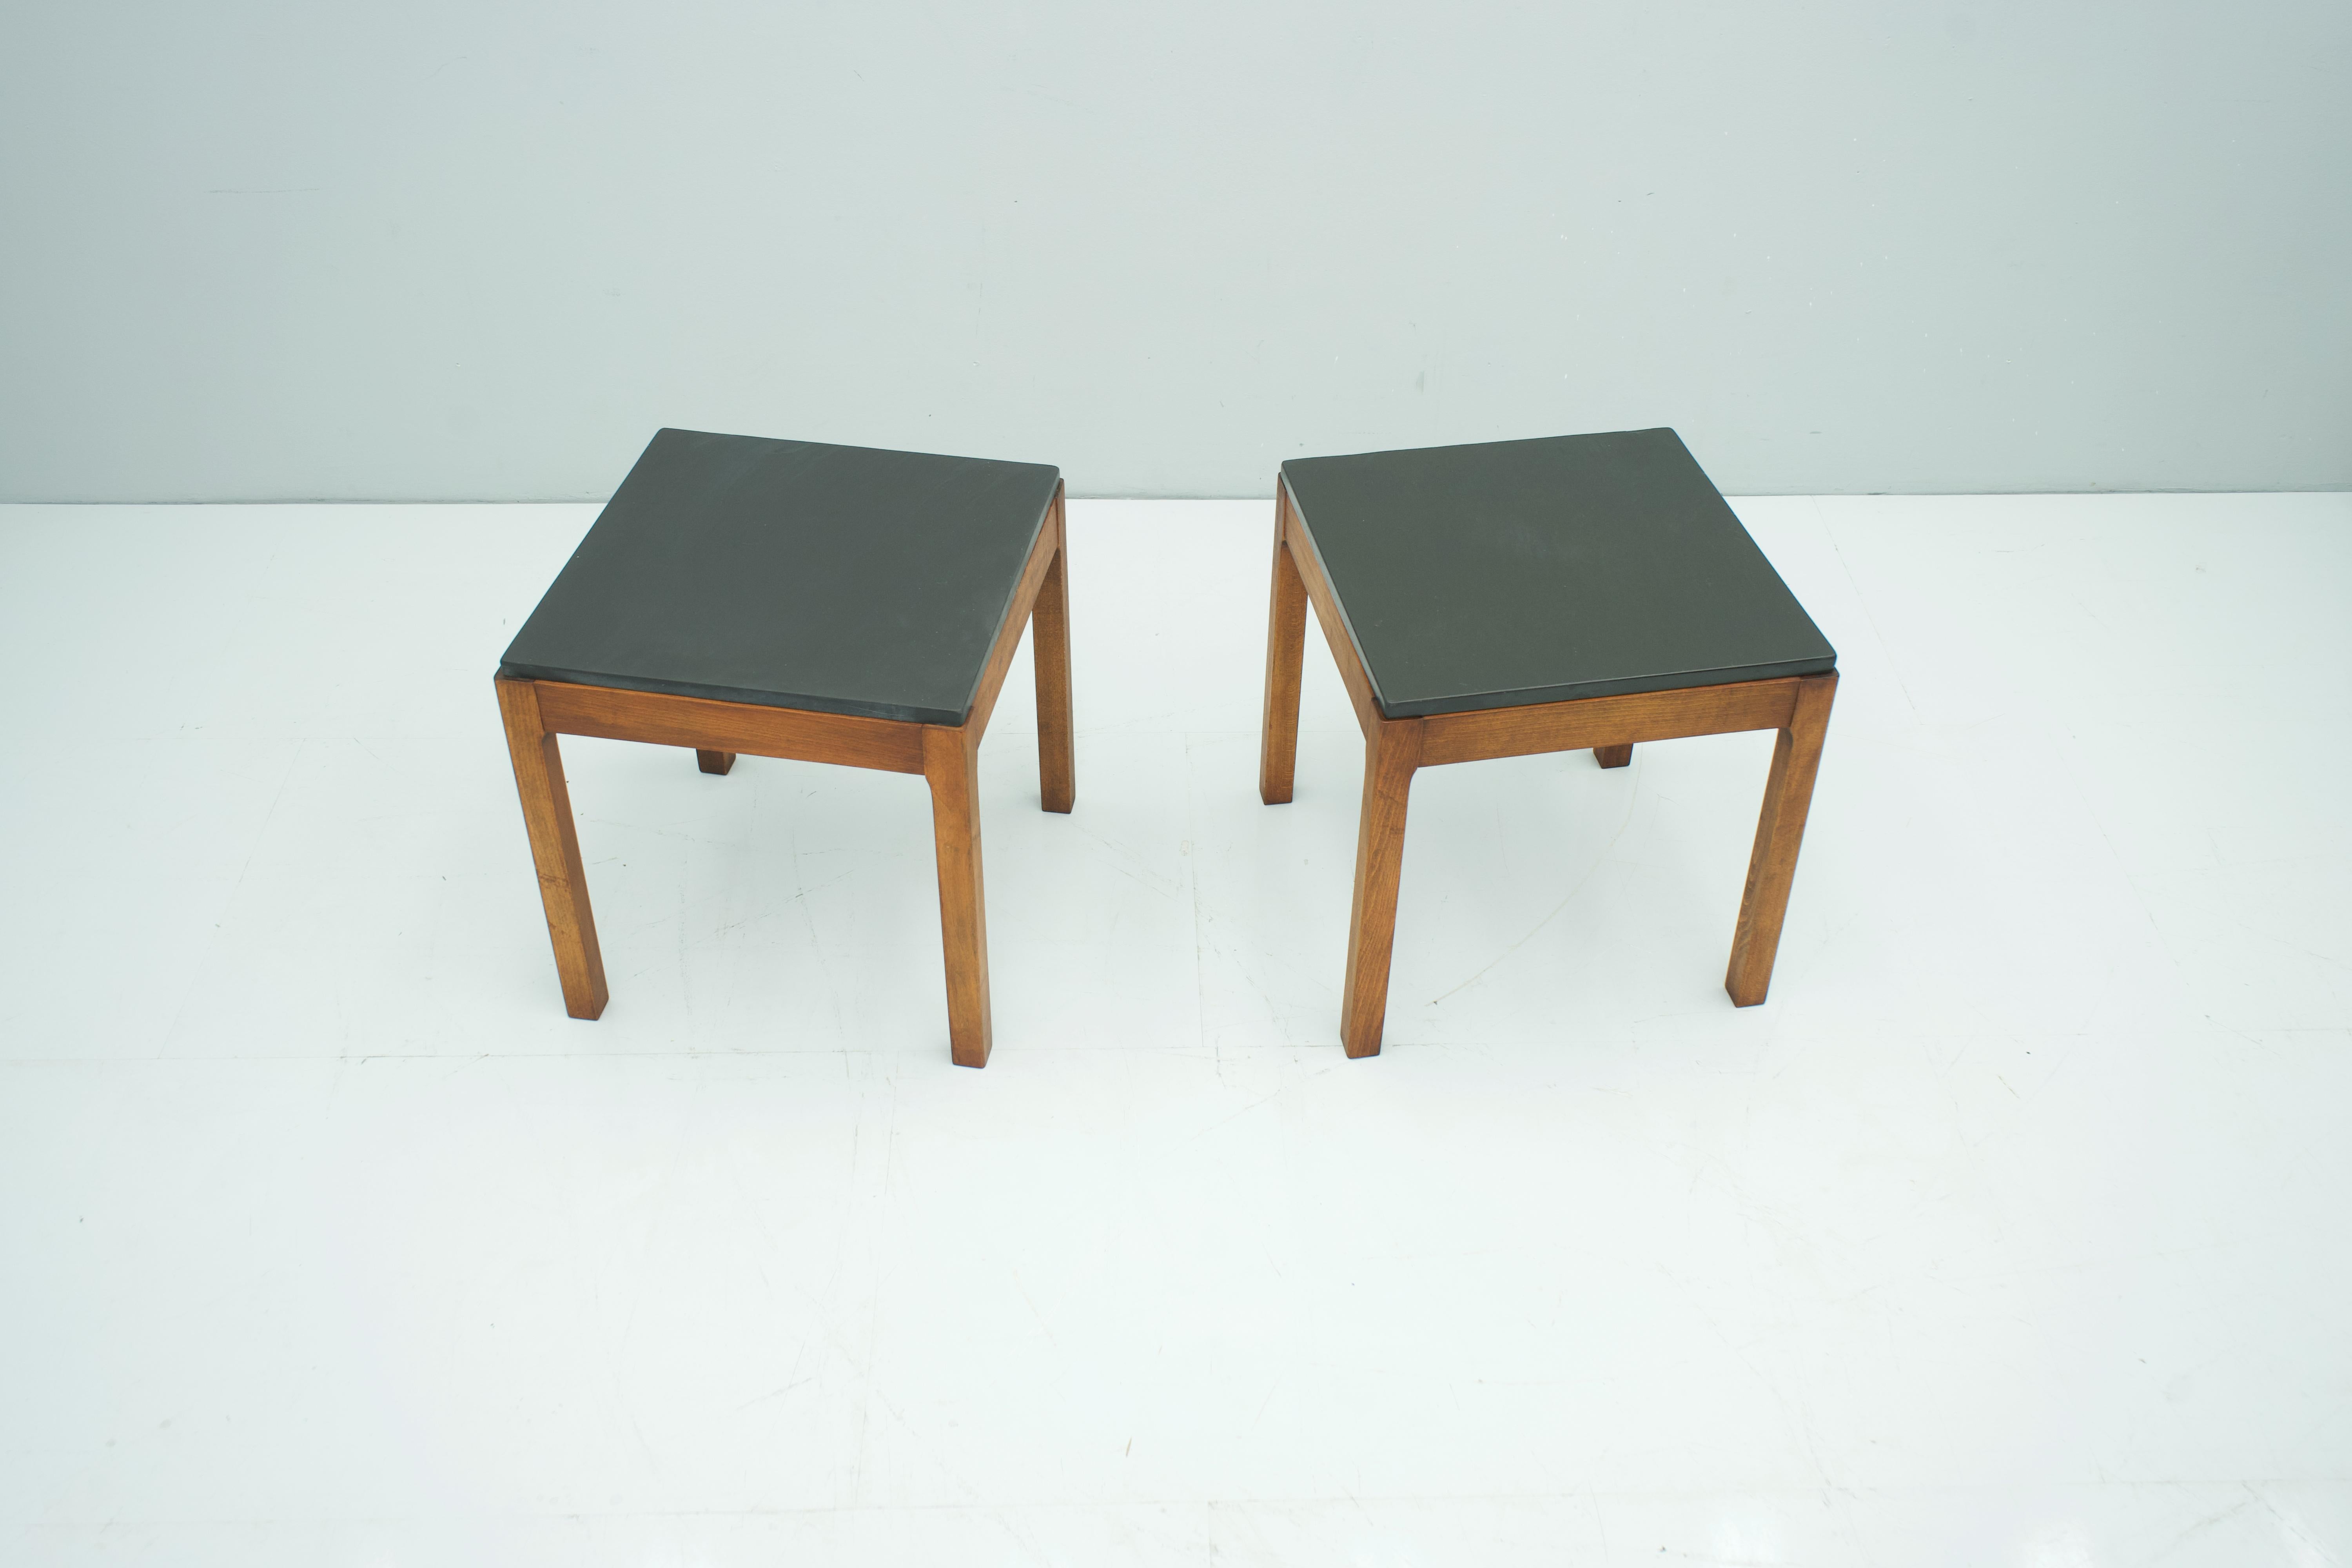 Pair of slate and wood side tables, 1950s

Very good condition.